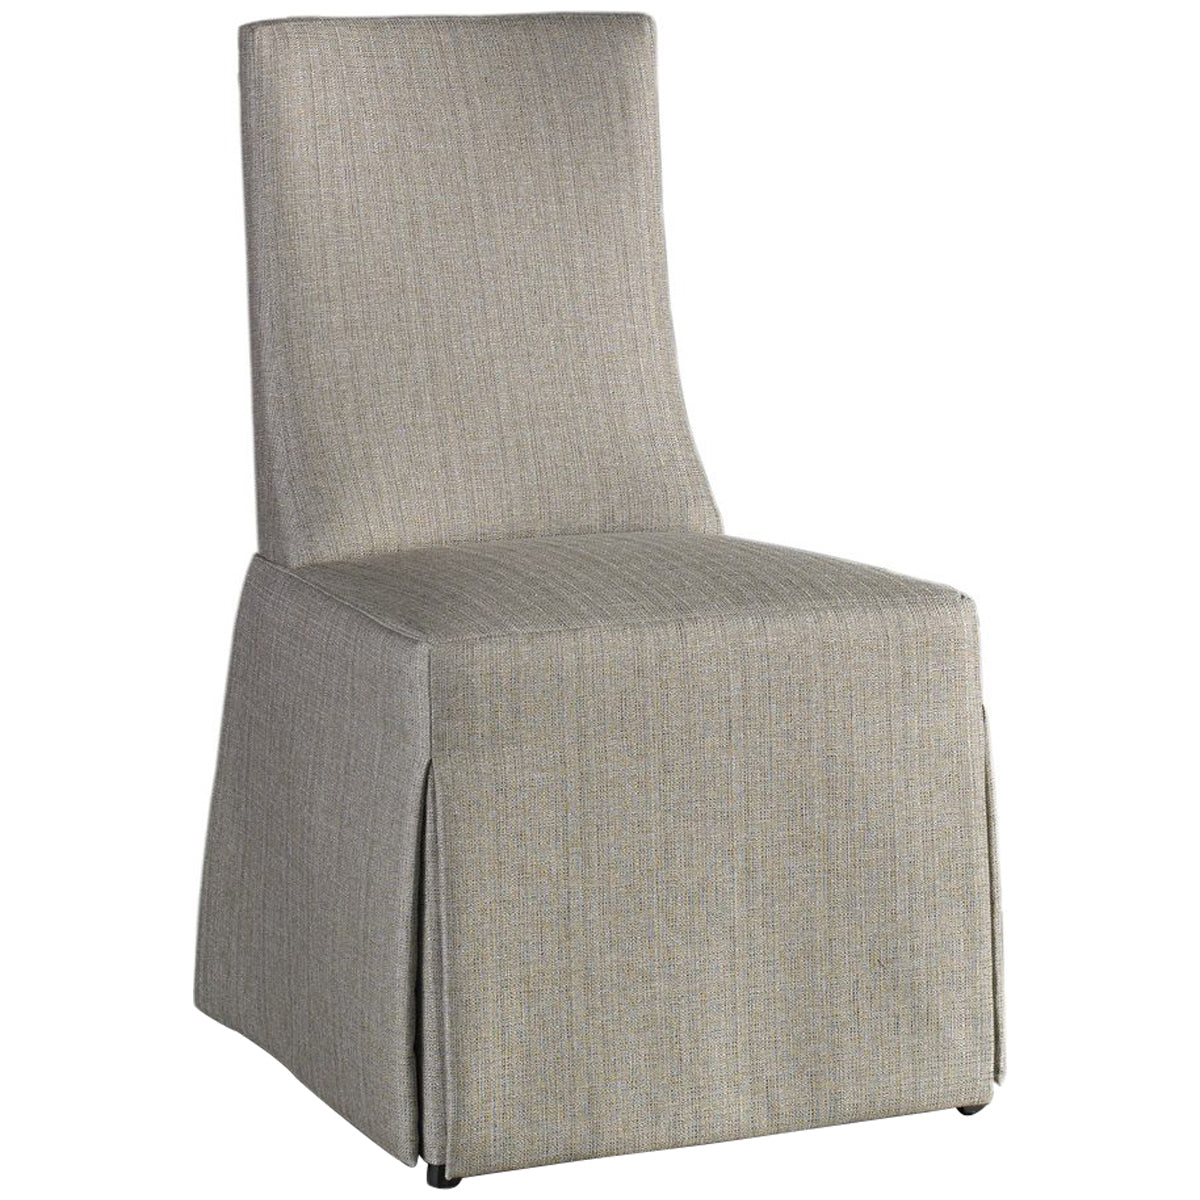 Hickory White Odyssey Oasis Skirted Side Chair